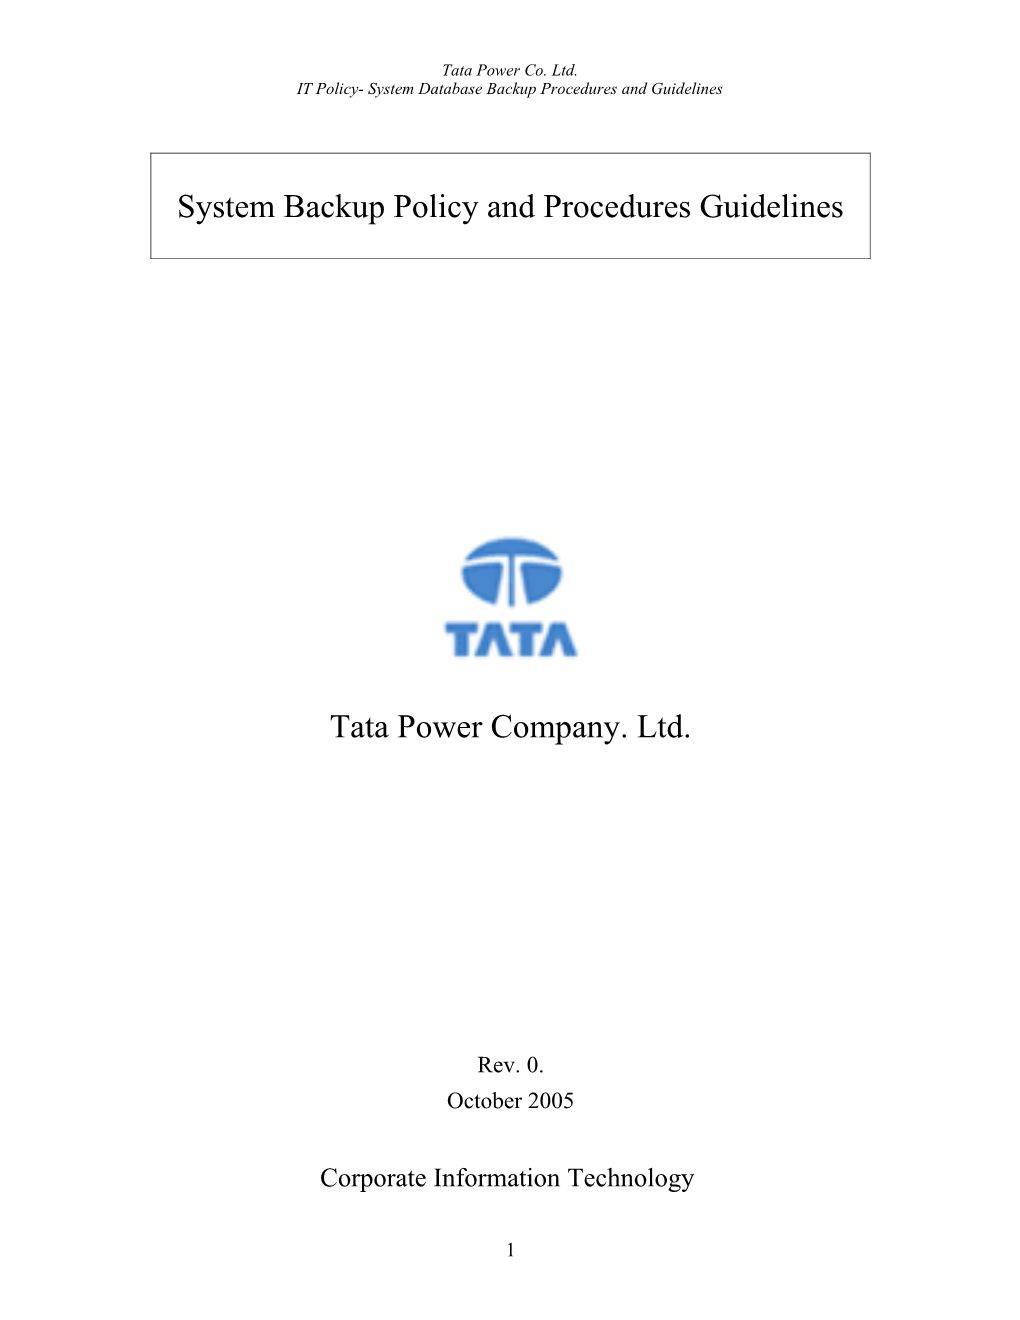 IT Policy- System Database Backup Procedures and Guidelines